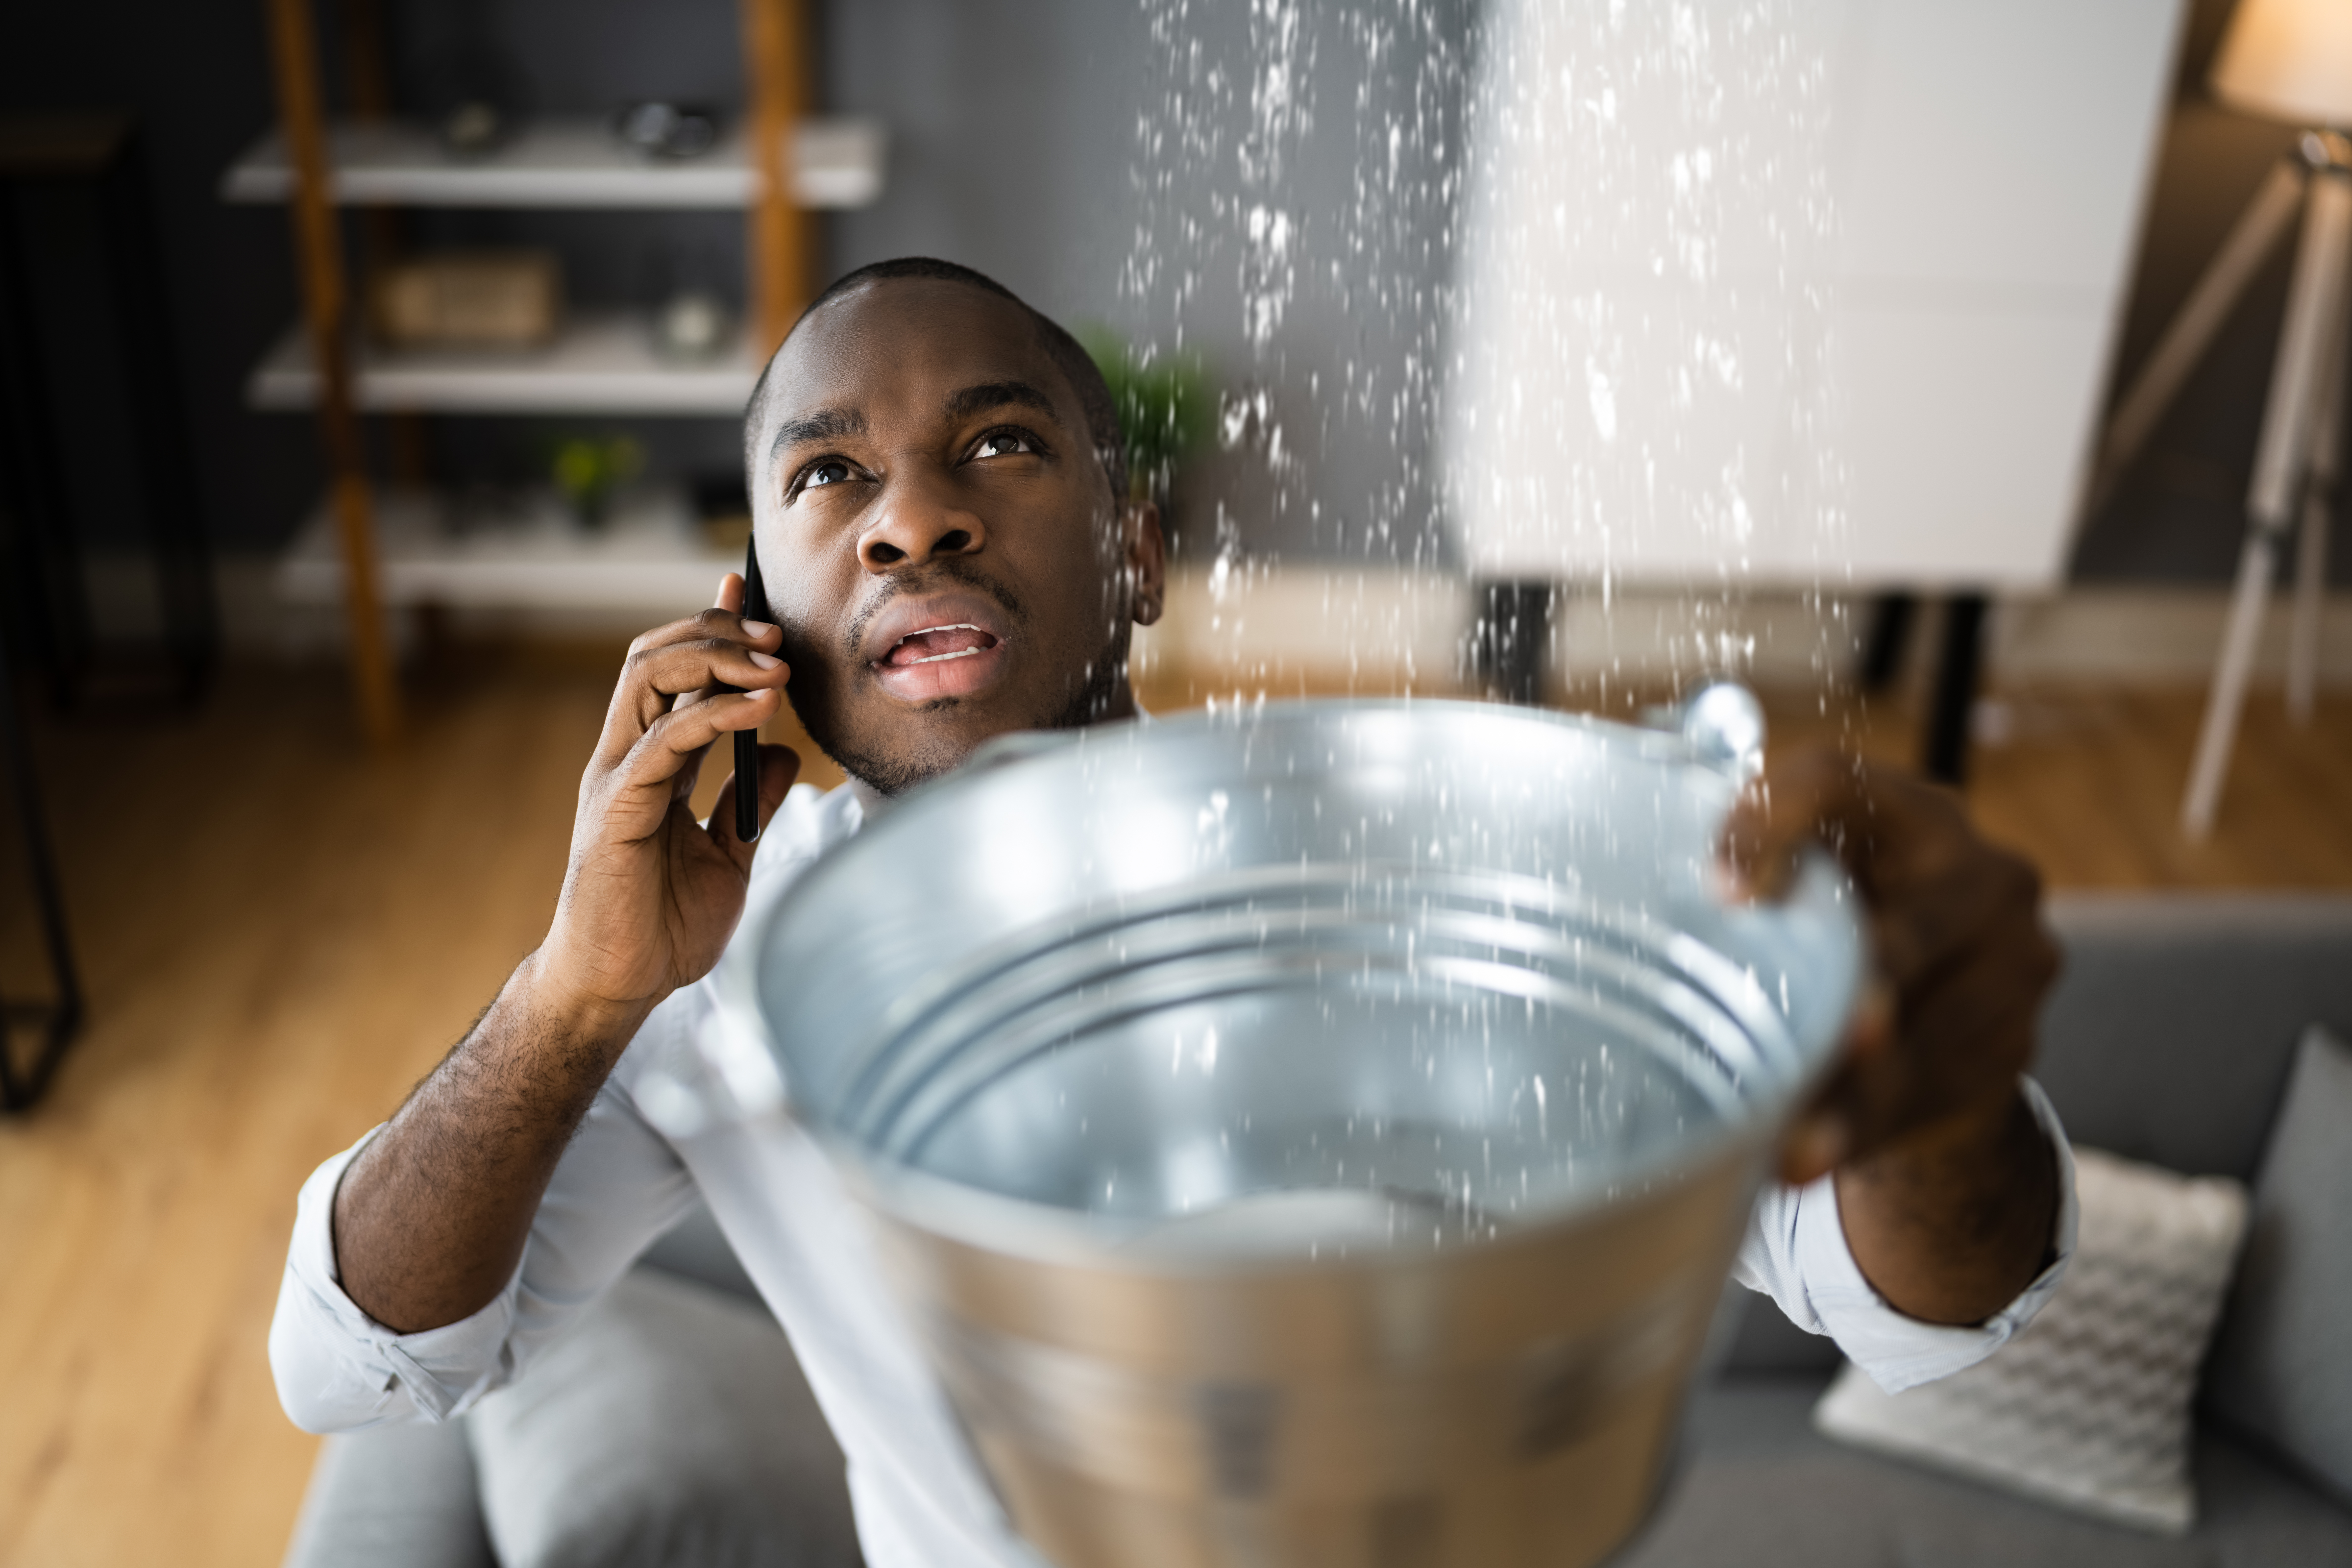 Keep Your Home Dry: 10 Water Damage Prevention Tips to Avoid Leaks and Flooding